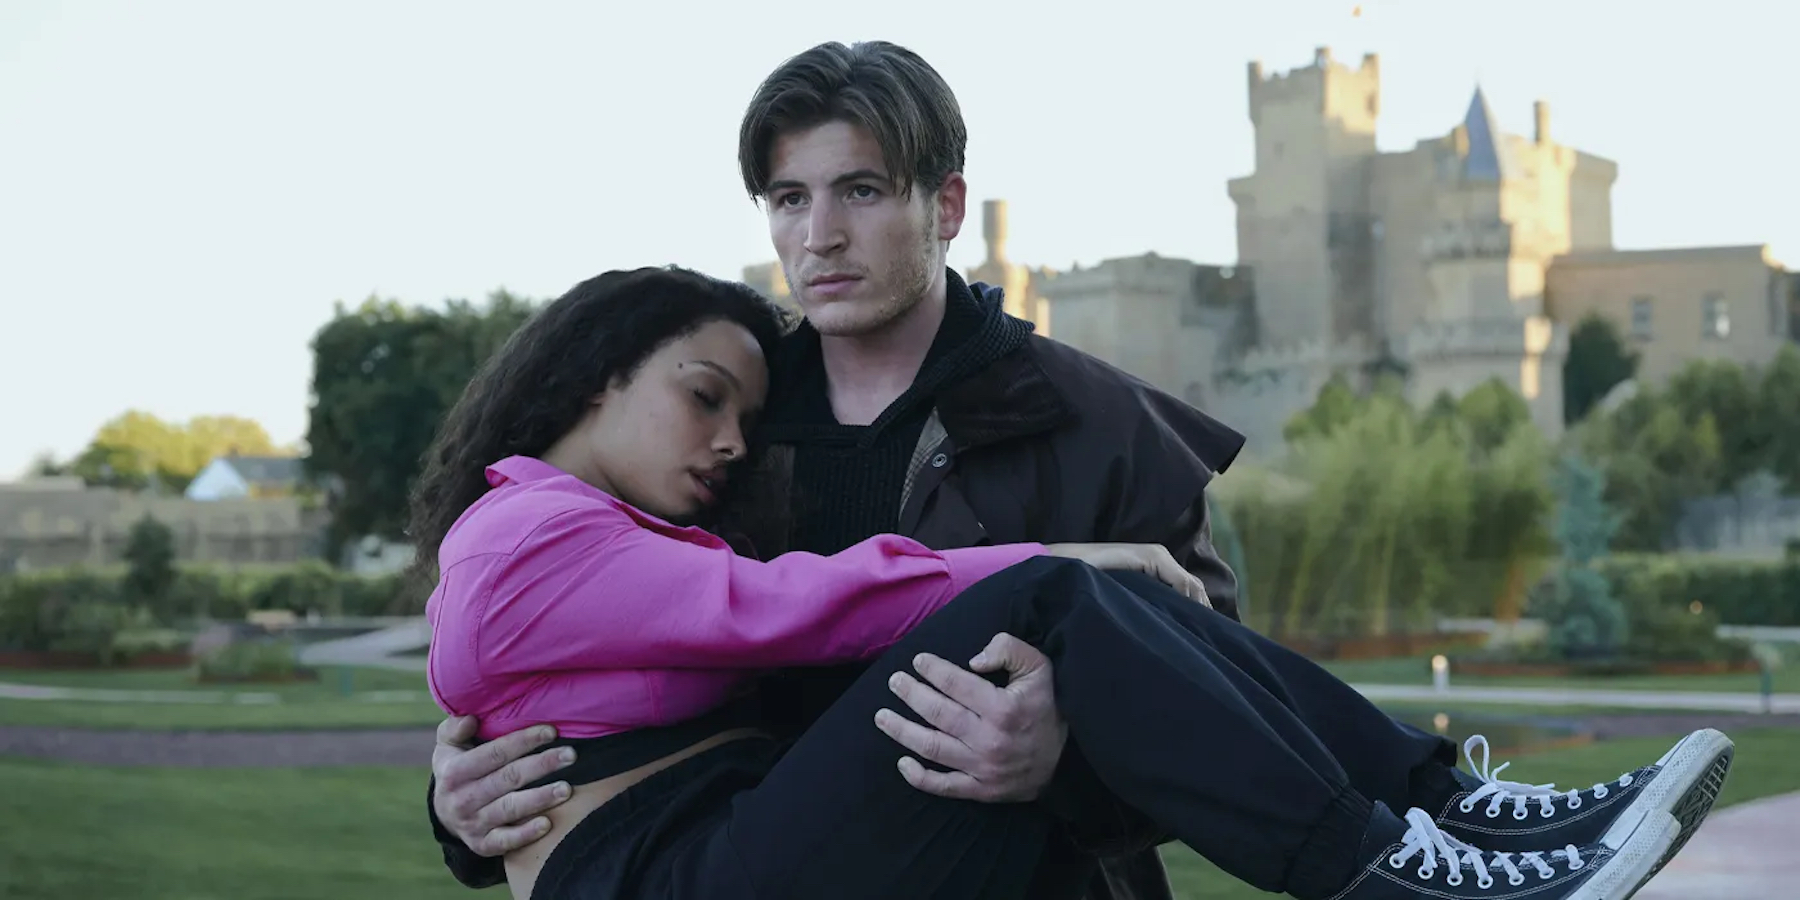 A white man cradles a young Black woman in his arms. She appears to be sleeping or incapacitated. Behind them stands a moderately sized castle.